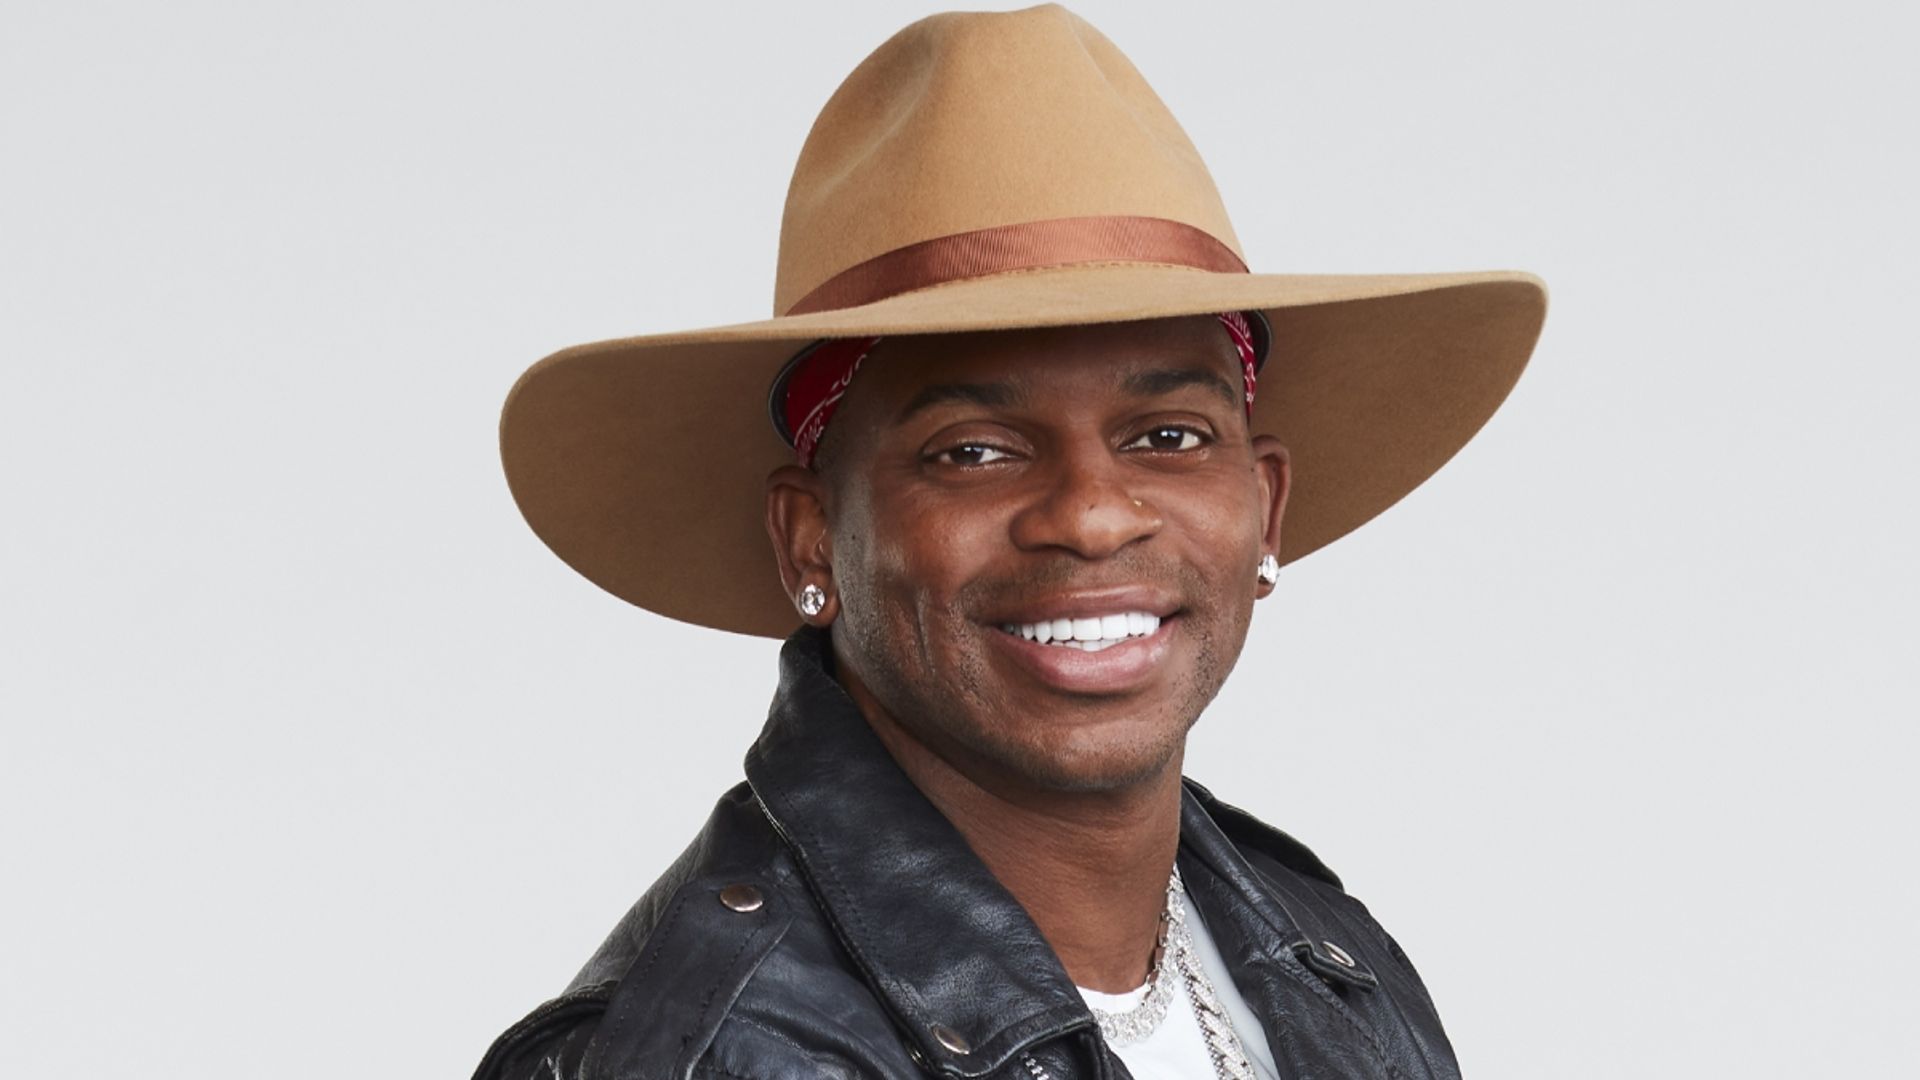 Dancing with the Stars contestant Jimmie Allen shares wonderful baby news